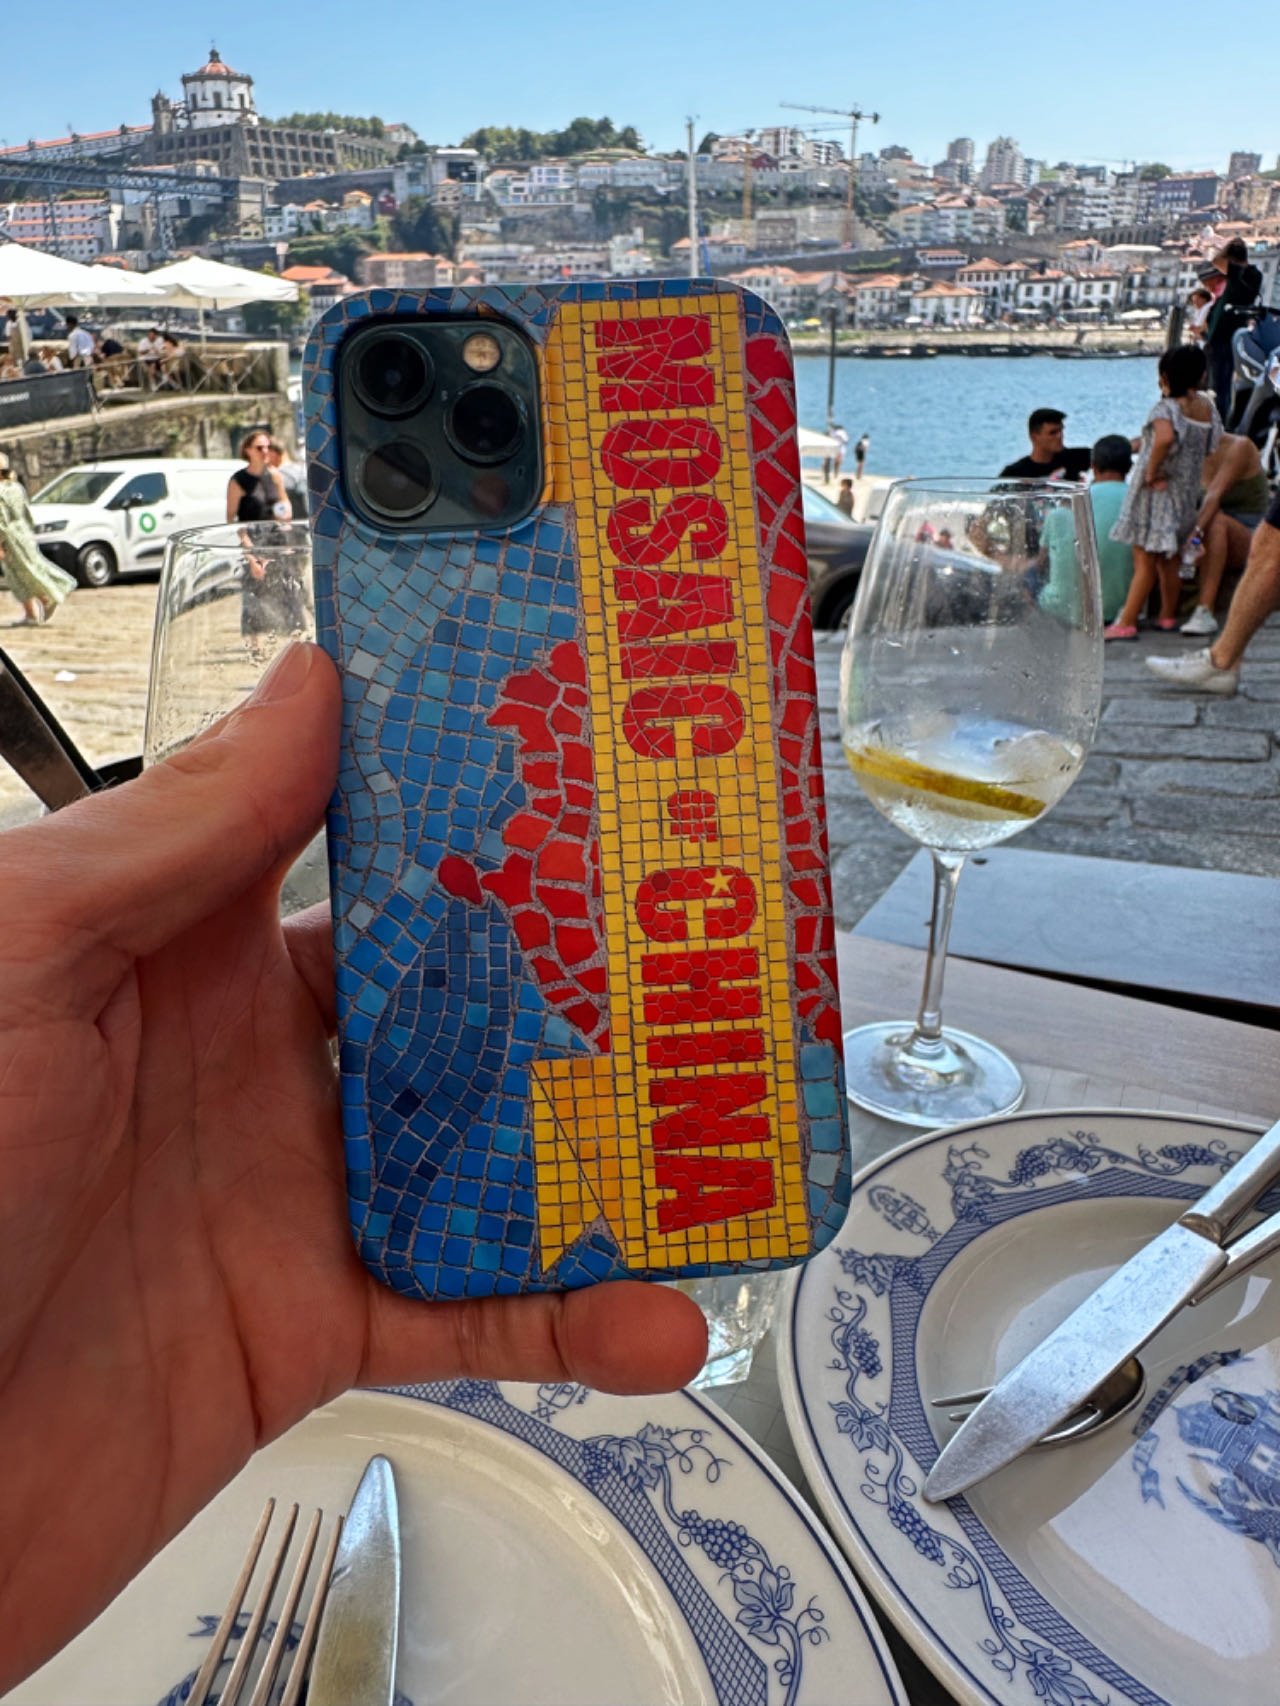 Oscar's Mosaic of China phone case on proud display in Porto, Portugal.